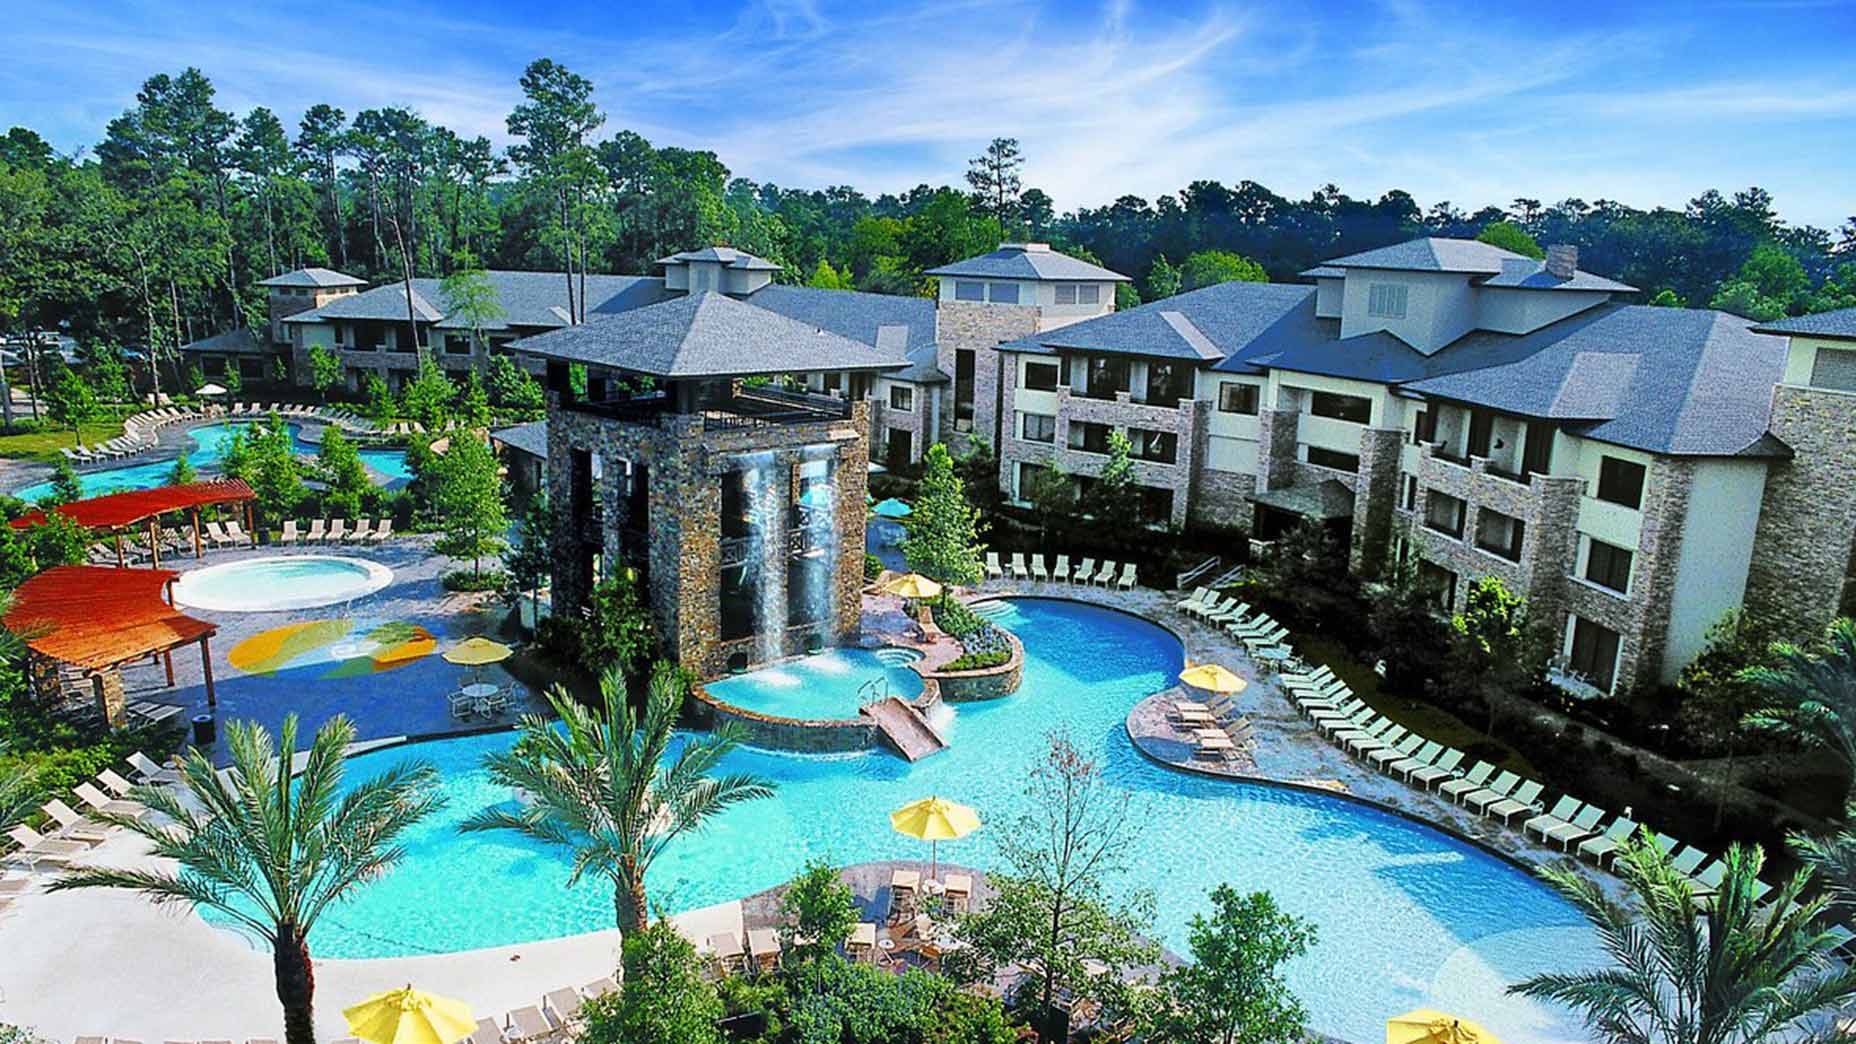 the pool area at the woodlands resort in texas